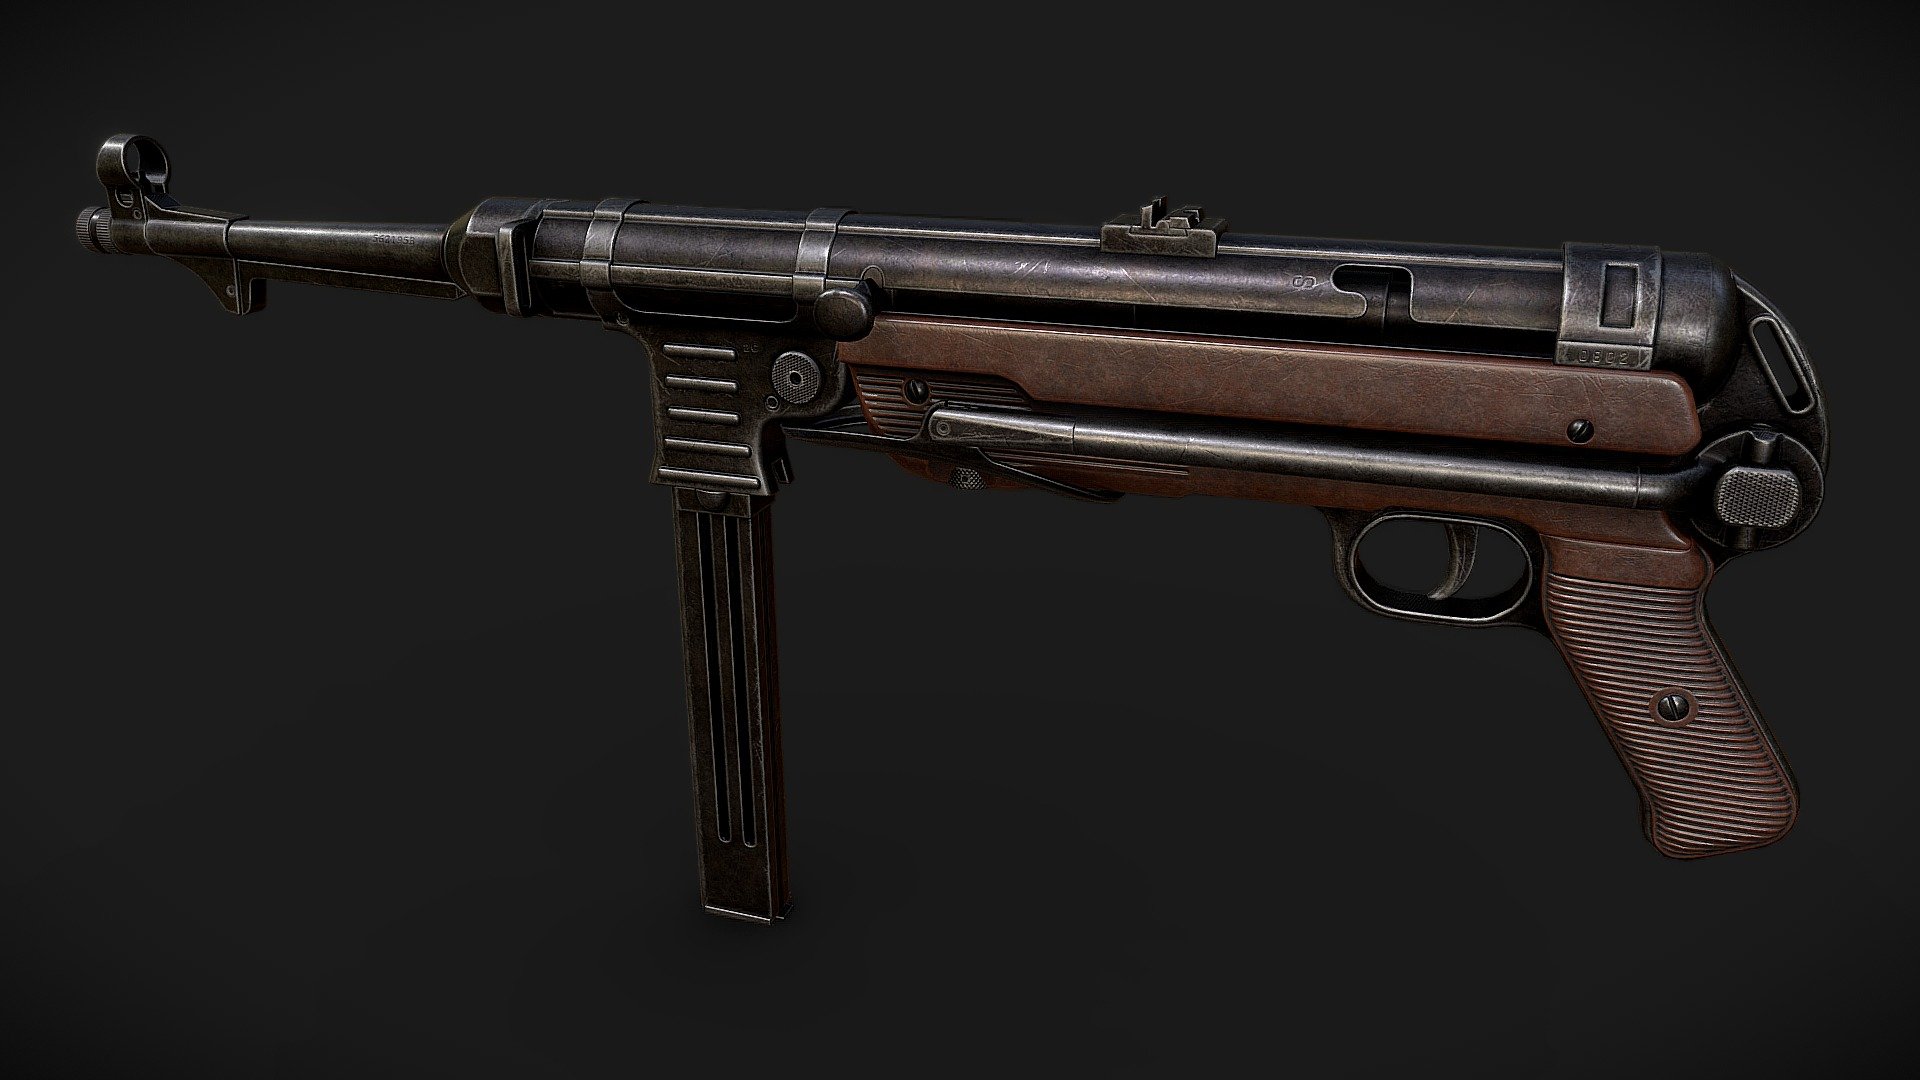 &mdash;General Information&mdash;





Lowpoly, optimized for modern game engines.




Made using real world scales




High quality 4k textures




Created to be used in a modern engine that supports physically based rendering (PBR) comes with textures optimized for Unreal Engine 4 and Unity 5.



-Detailed Model Specifications-

Weapon and Magazine contains 25 separate objects and are ready to be rigged. the objects are:








Grip







Handguard







Bolt







Bolt2







Bolt3







Bolt4







Cooling bar







Receiver 







Bullets







Front sight







Barrel







Magazine







Magazine holder







Ring for sling







Stock realese button







Receiver lock screw







Ejector







Muzenut







Front sight base







Trigger







Rear sight







Grip frame







Folding stock







Shoulder stock







Cocking handle



Geometry :

Polygon : 10229

Vertices : 11025

-Texture Information-

All 4k Texture (All textures are in .tga format)  for unreal engine and unity engine - MP40 - Buy Royalty Free 3D model by GameWeapons 3d model